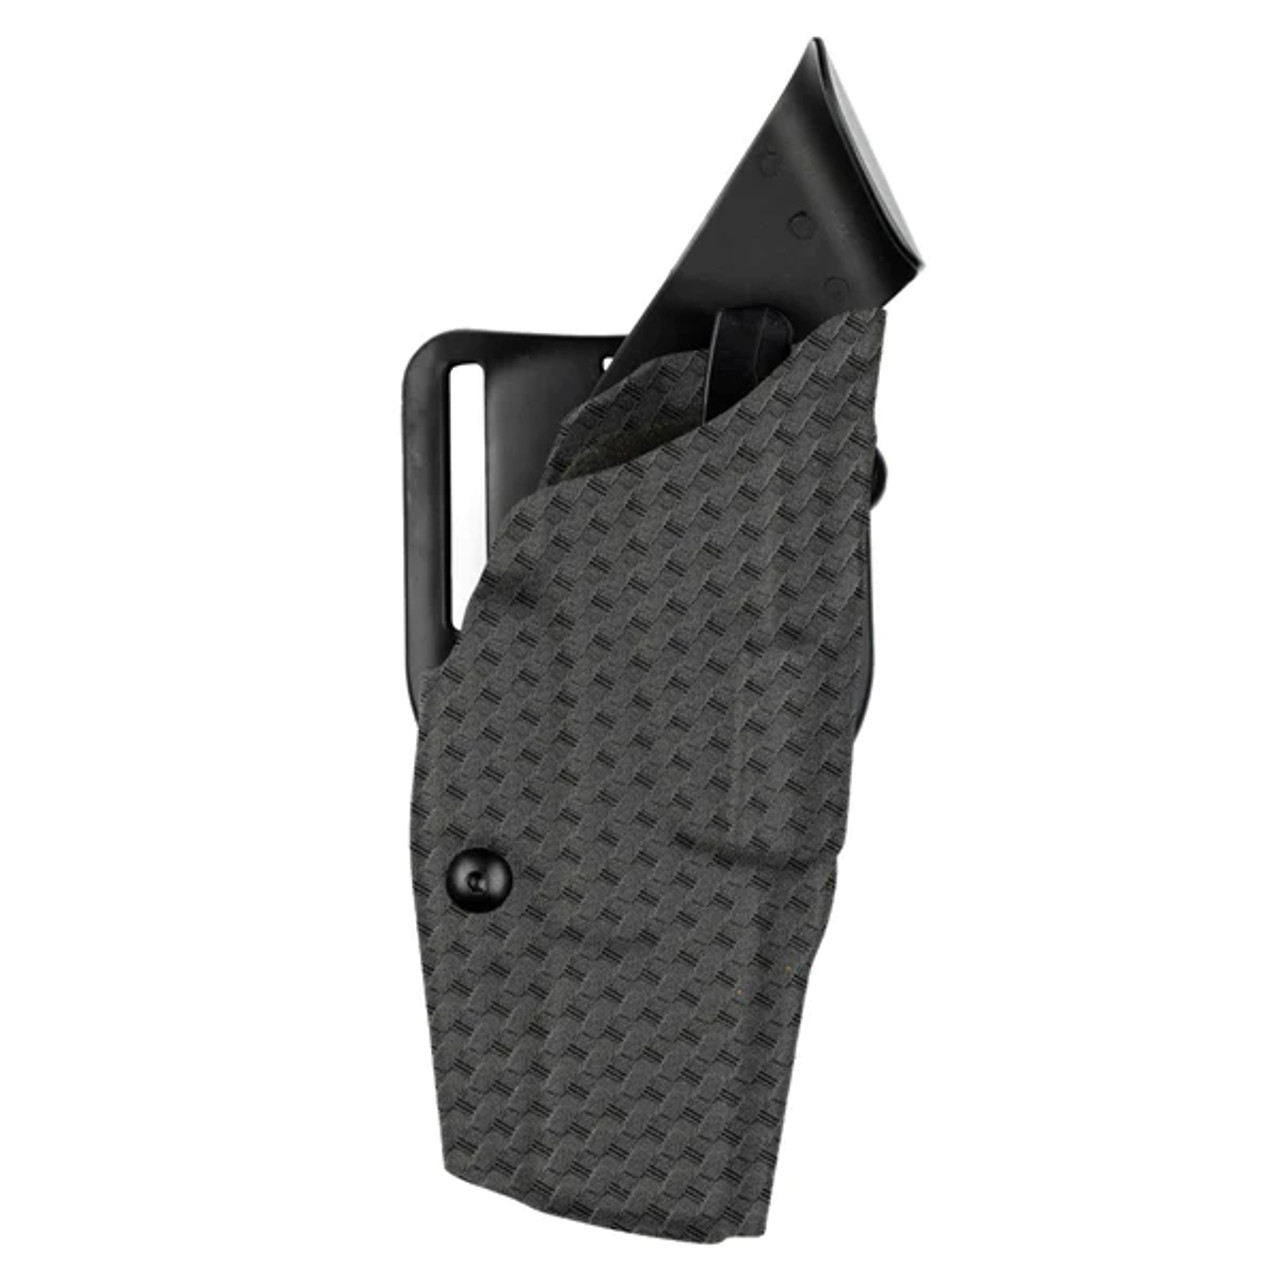 Safariland 6390 Mid-Ride Level I Retention Duty Holster for Sig